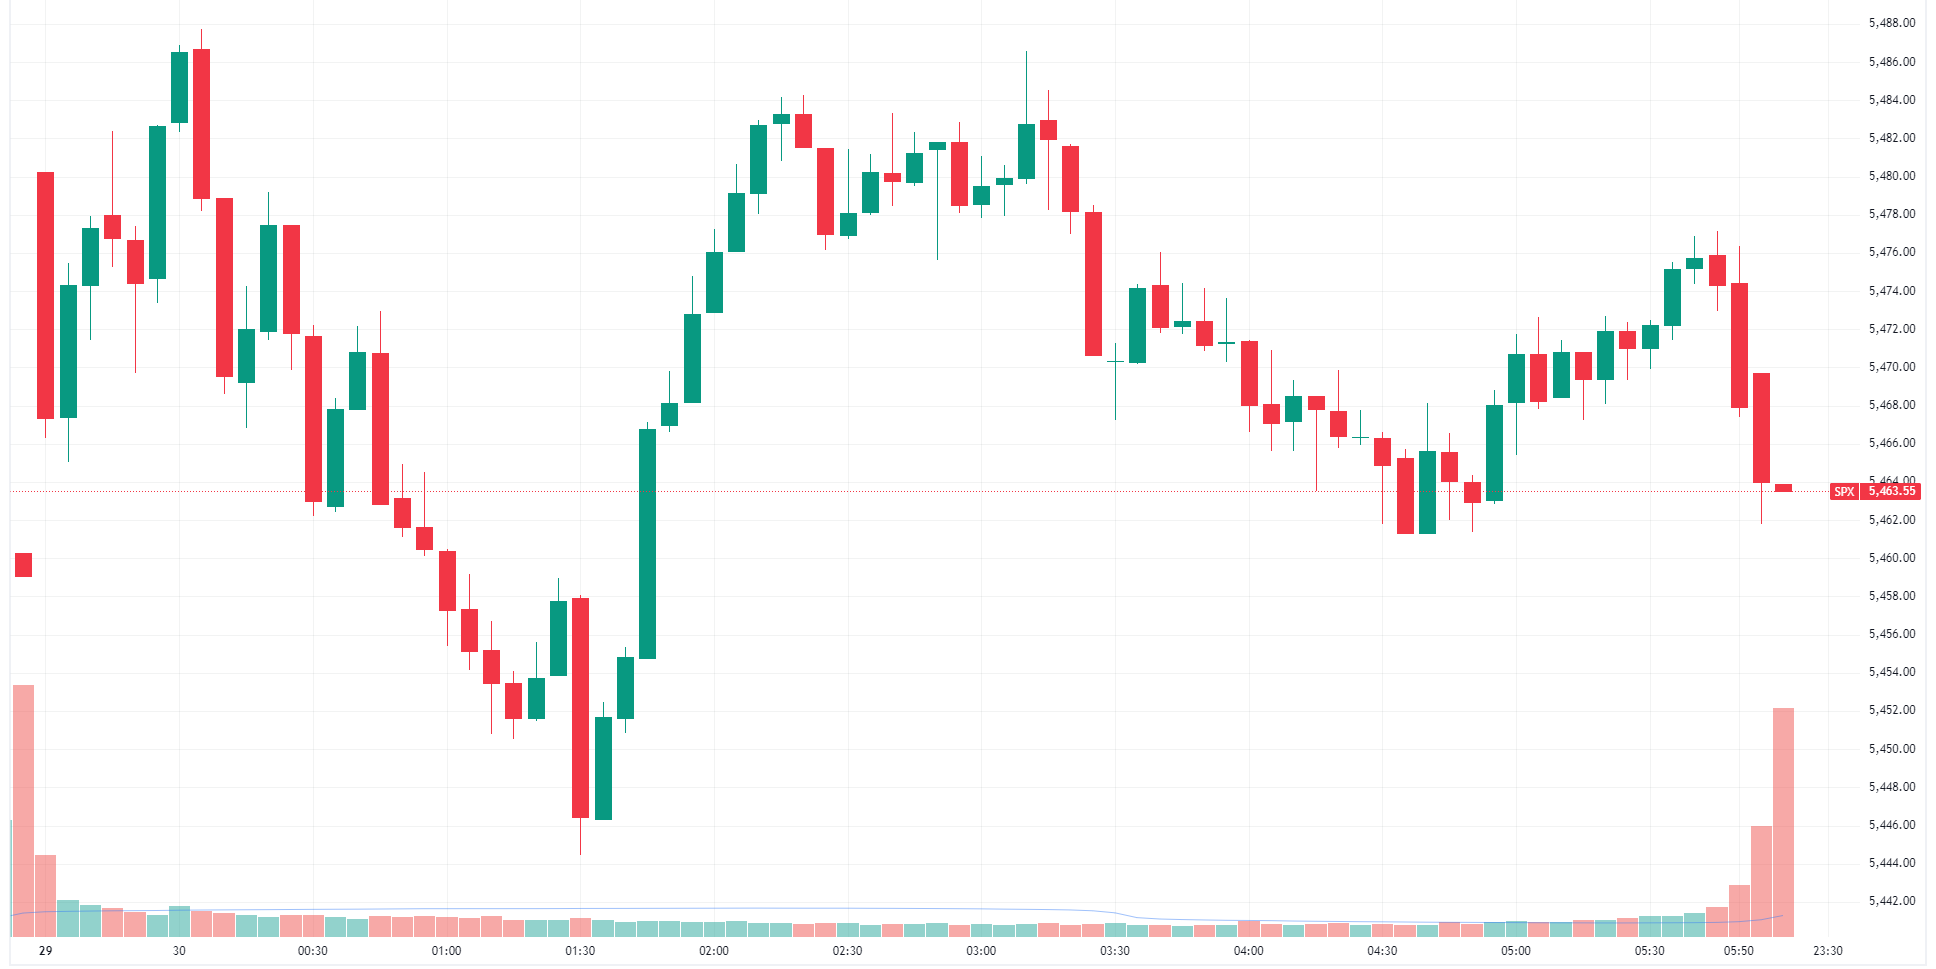 A choppy, sideways session for the S&P 500 (Source: TradingView)